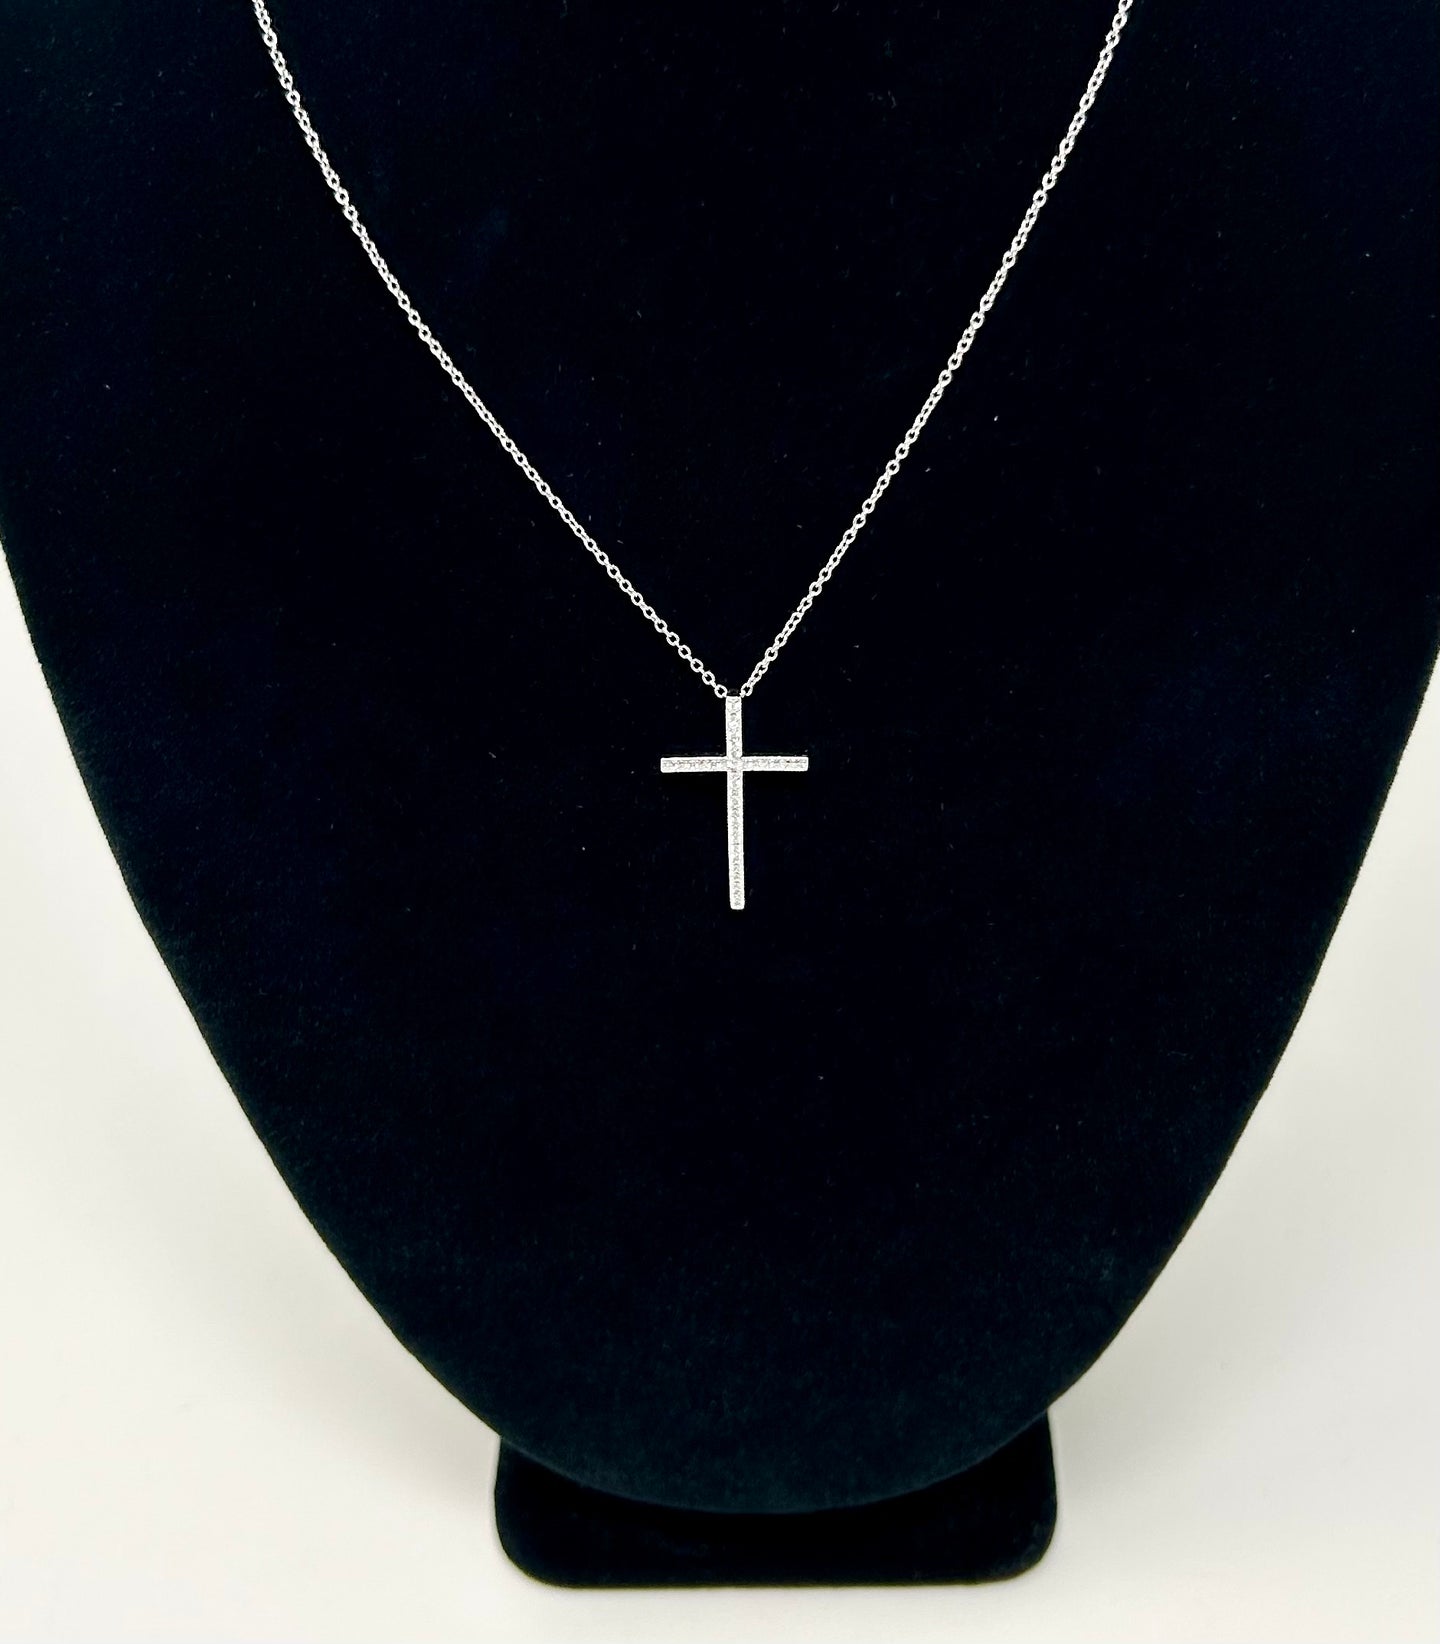 Fine CZ filled crossed pendant necklace - silver finish